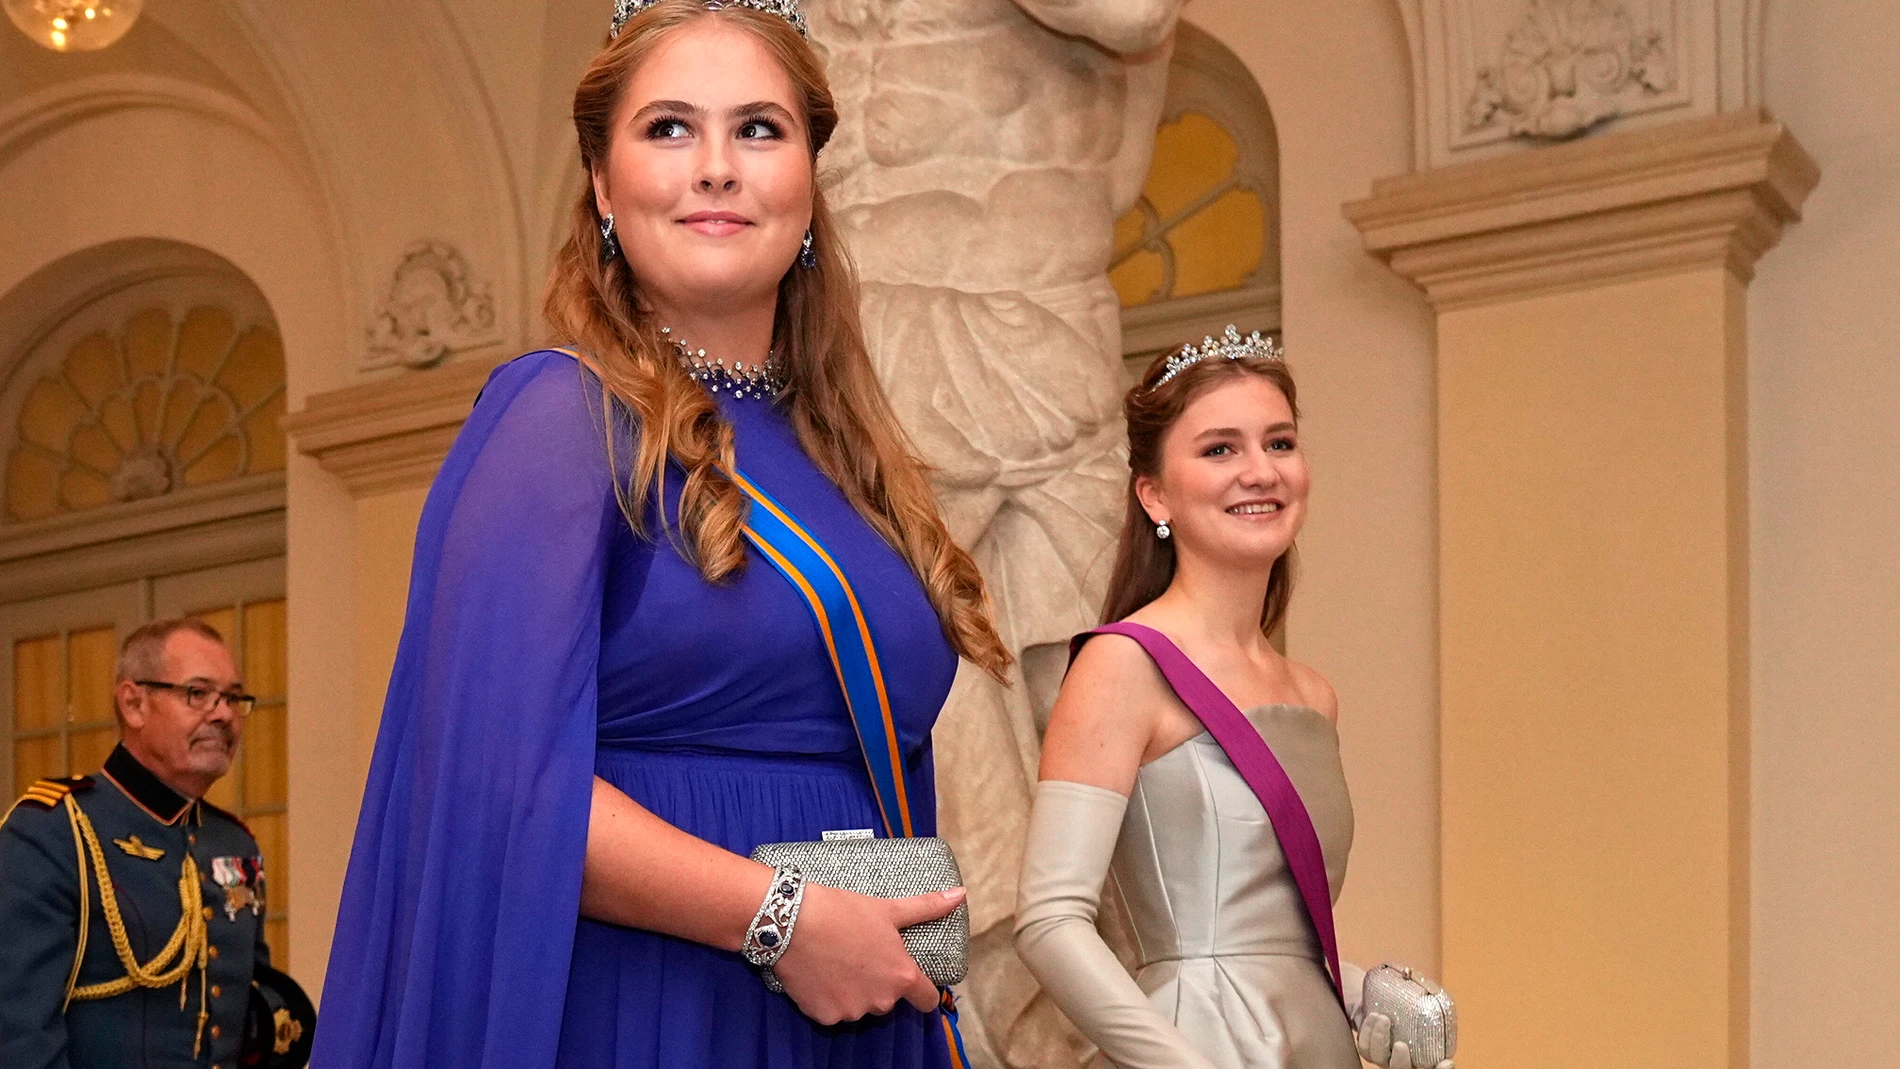 Copenhagen (Denmark), 15/10/2023.- Princess Catharina-Amalia of the Netherlands (L) and Princess Elisabeth of Belgium arrive for a gala dinner on the occasion of Prince Christian's of Denmark 18th birthday, at Christiansborg Castle in Copenhagen, Denmark, 15 October 2023. The Danish royal family members came together on the occasion of Prince Christian's 18th birthday the same day. Prince Christian is the eldest child of Danish Crown Prince Frederik and Crown Princess Mary. (Bélgica, Dinamarc...